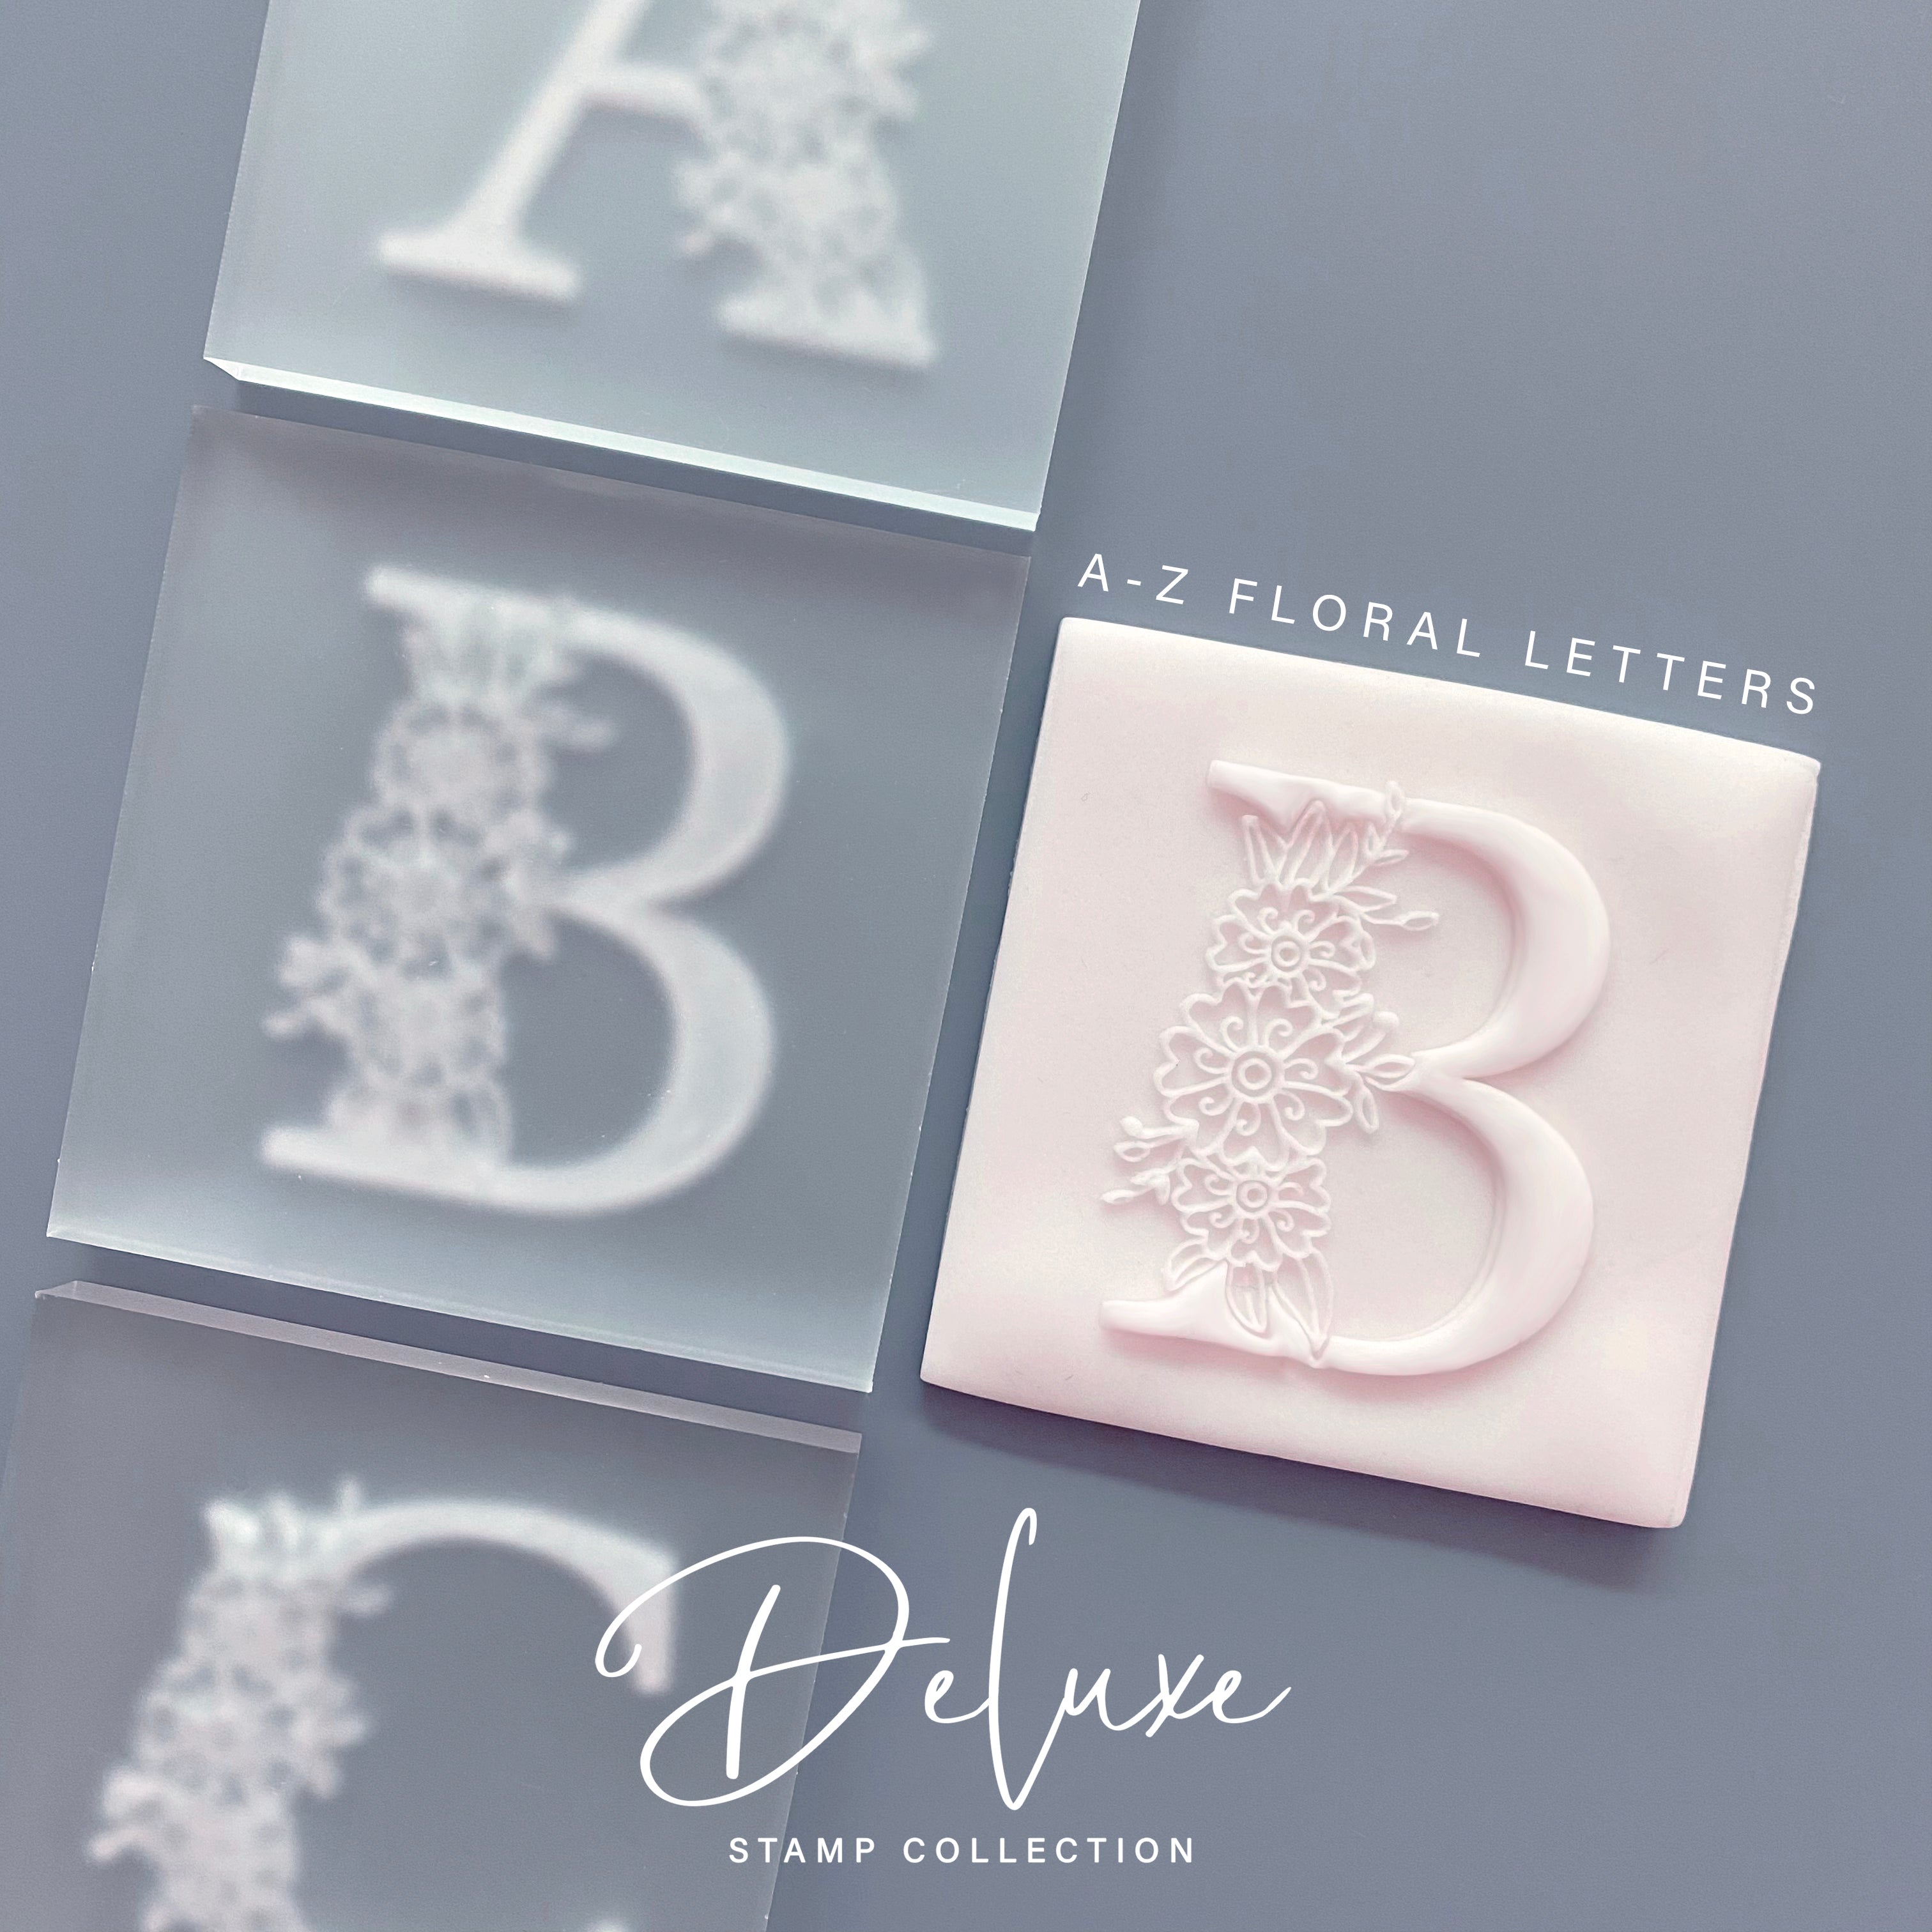 Floral A-Z Letters - Deluxe Stamp